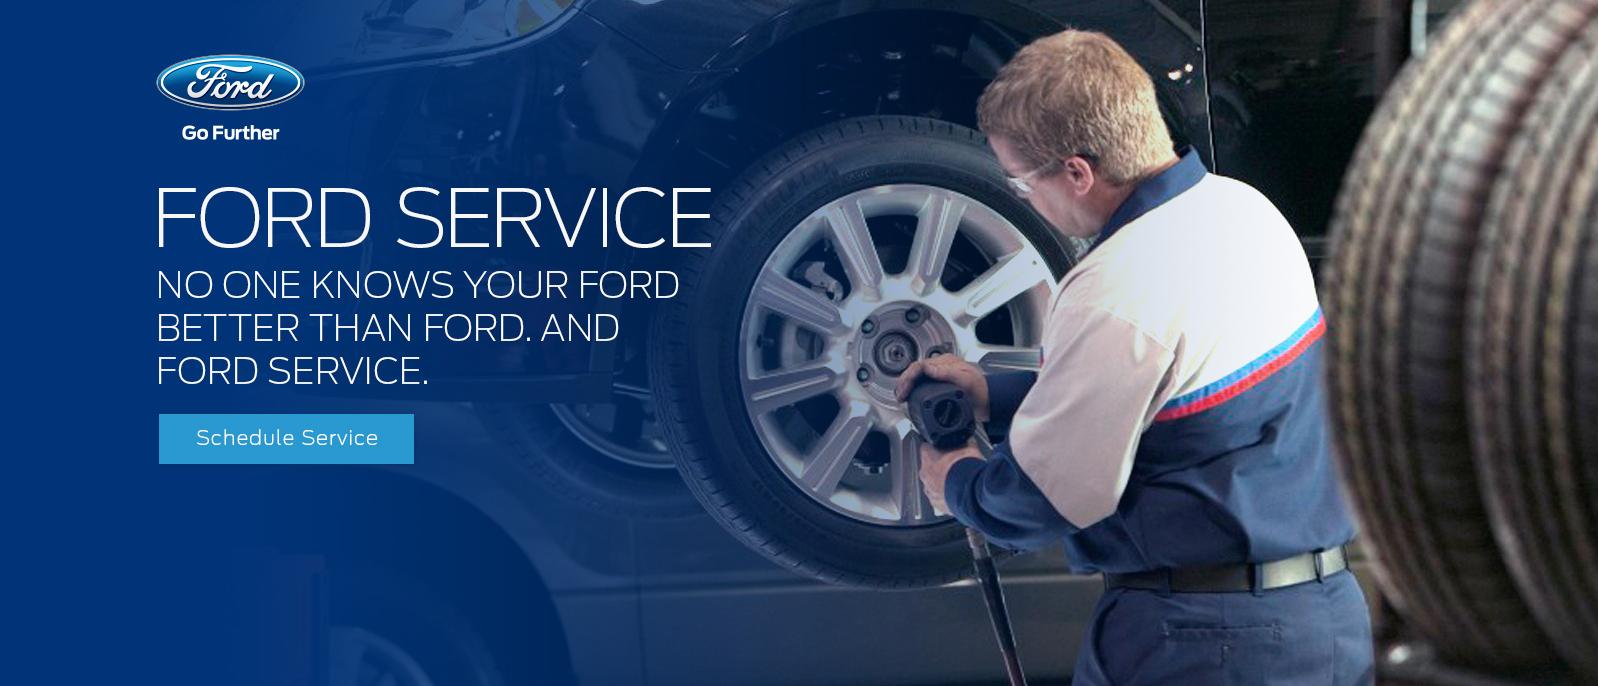 Ford Service tech installing a tire on a vehicle